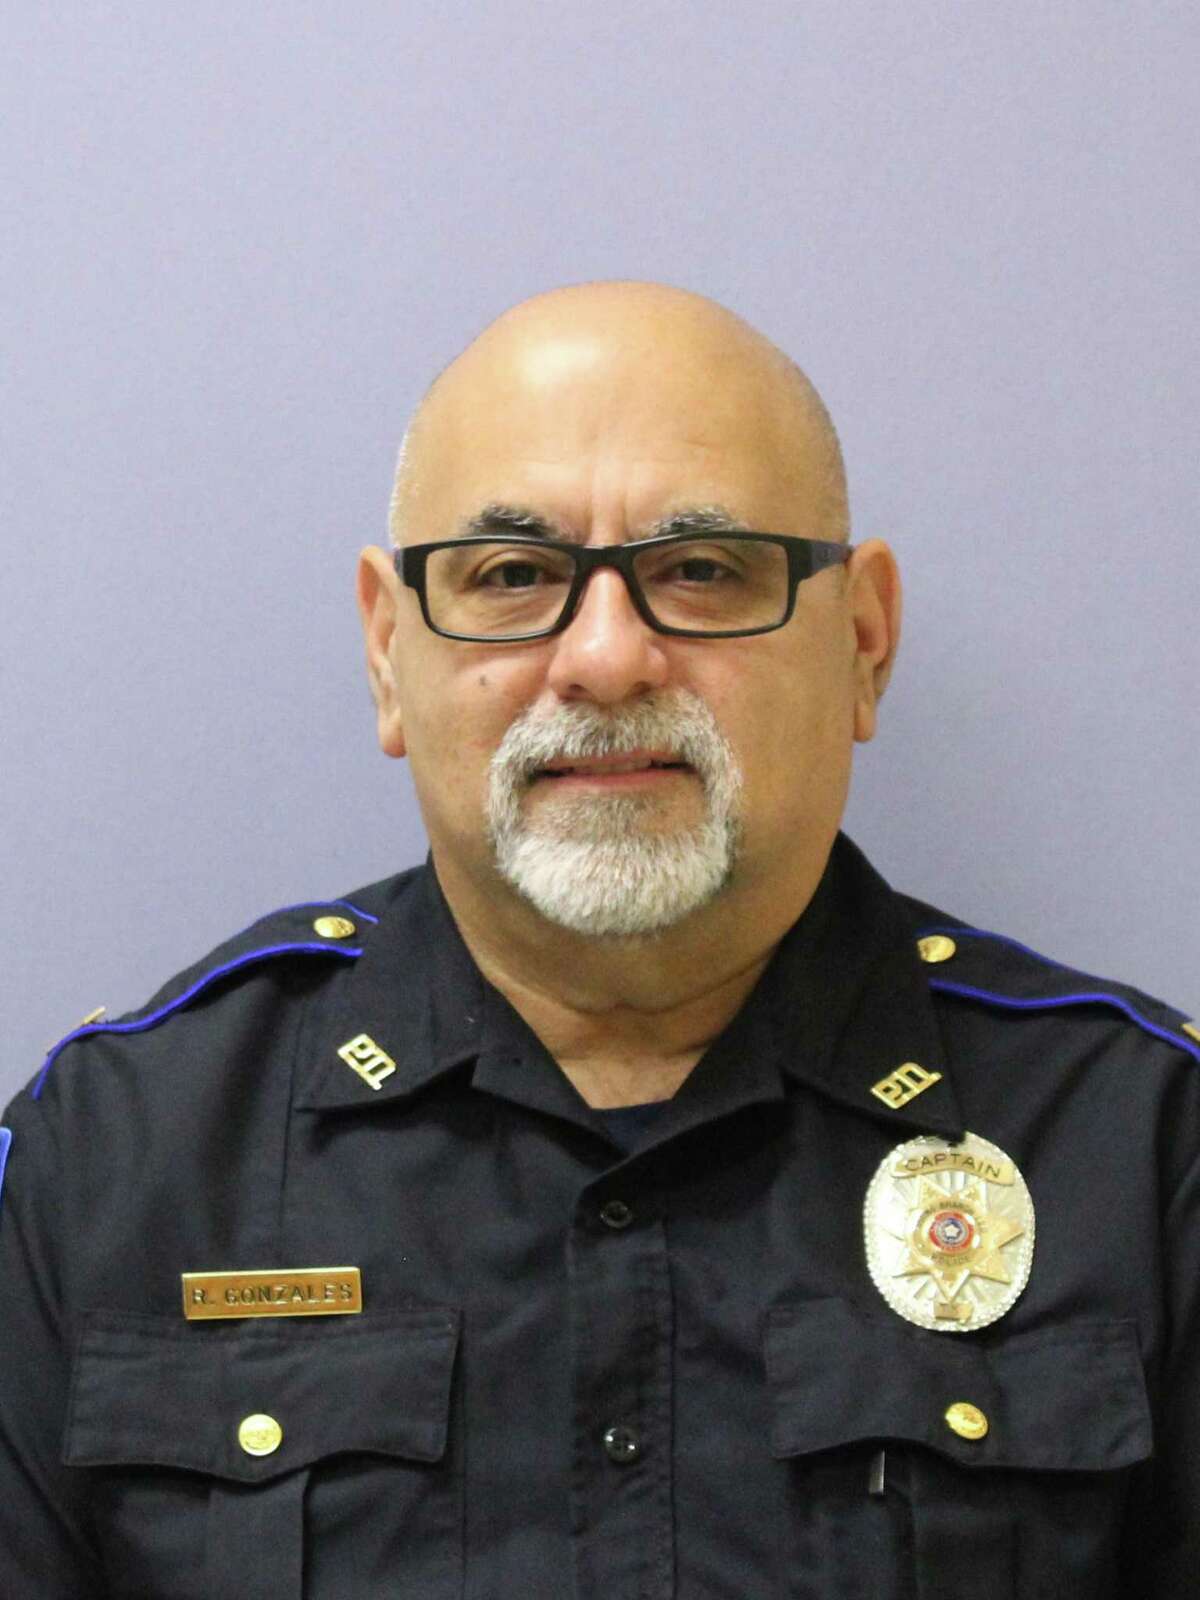 Spring Branch ISD Police Department's Raymond Gonzales, Jr. has been named captain, the latest in a series of promotions he has received throughout his 19 years with the department